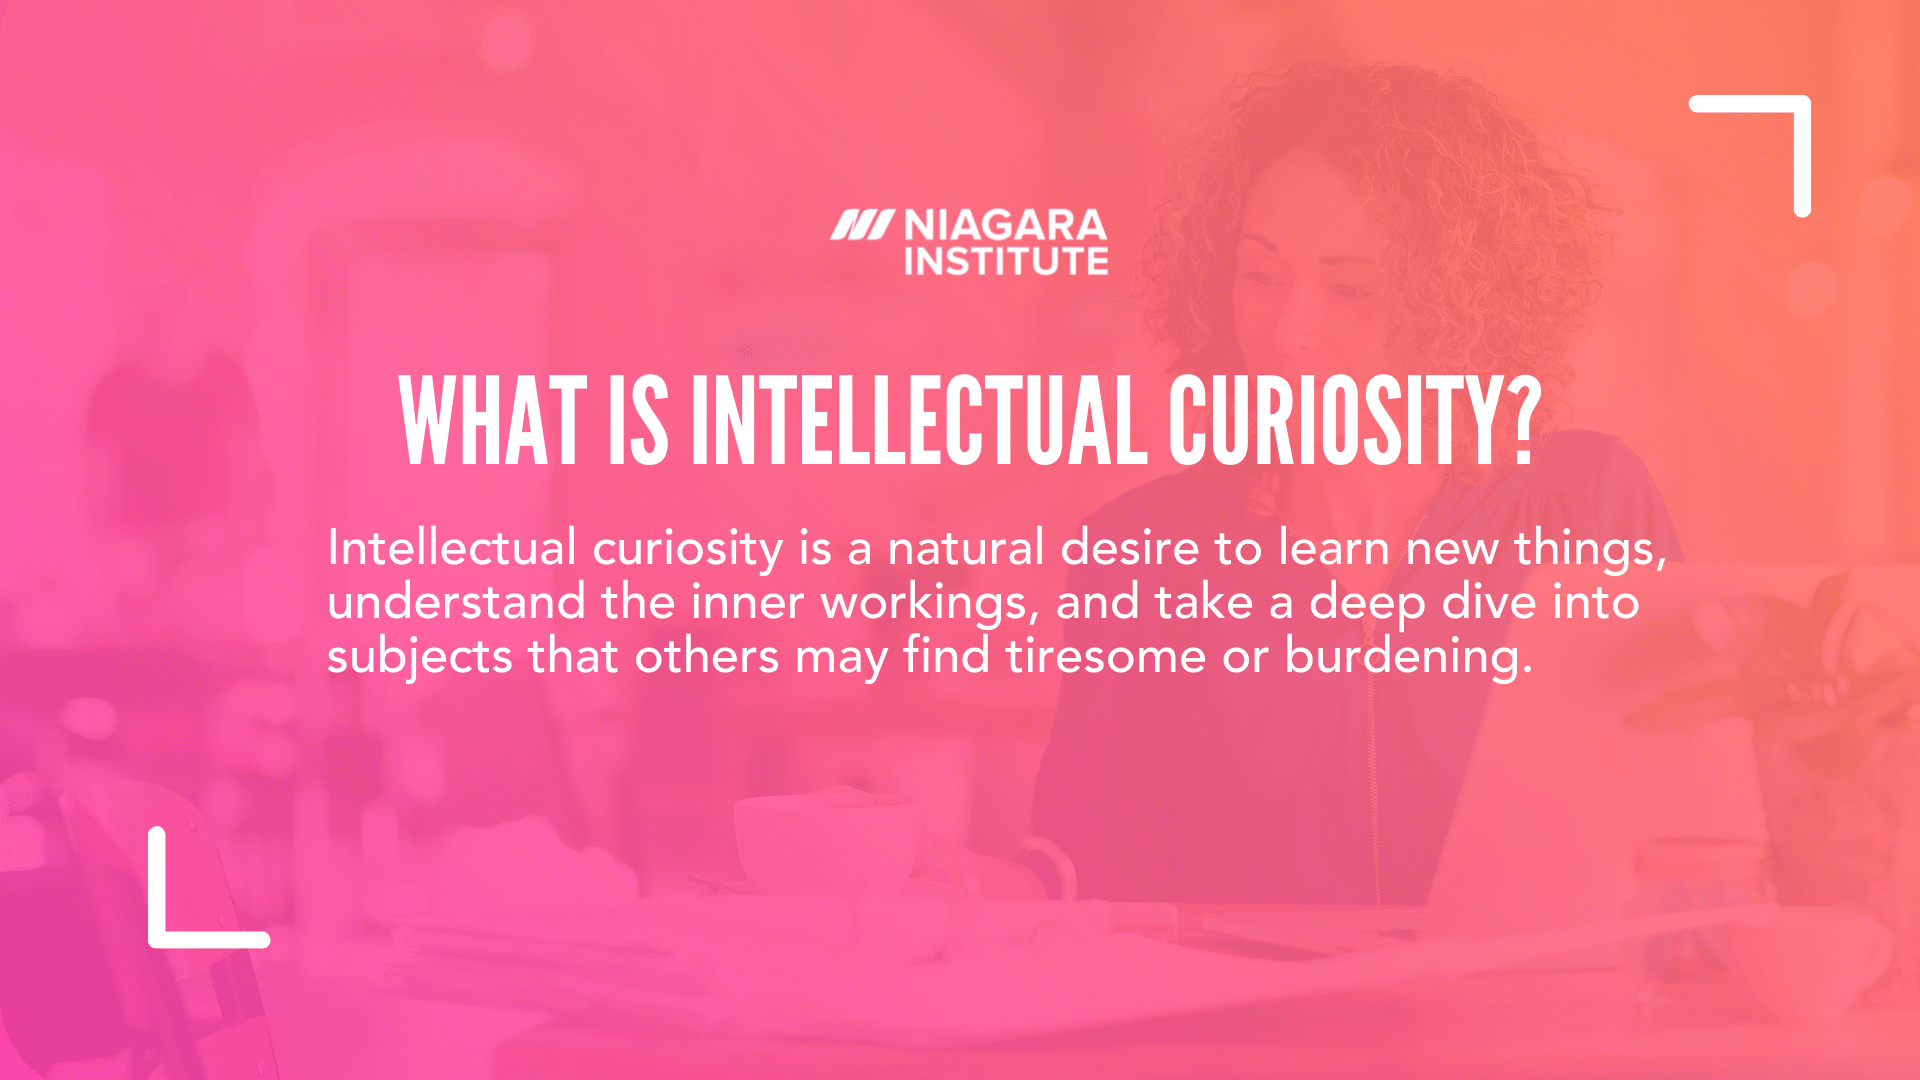 a research topic should arouse intellectual curiosity